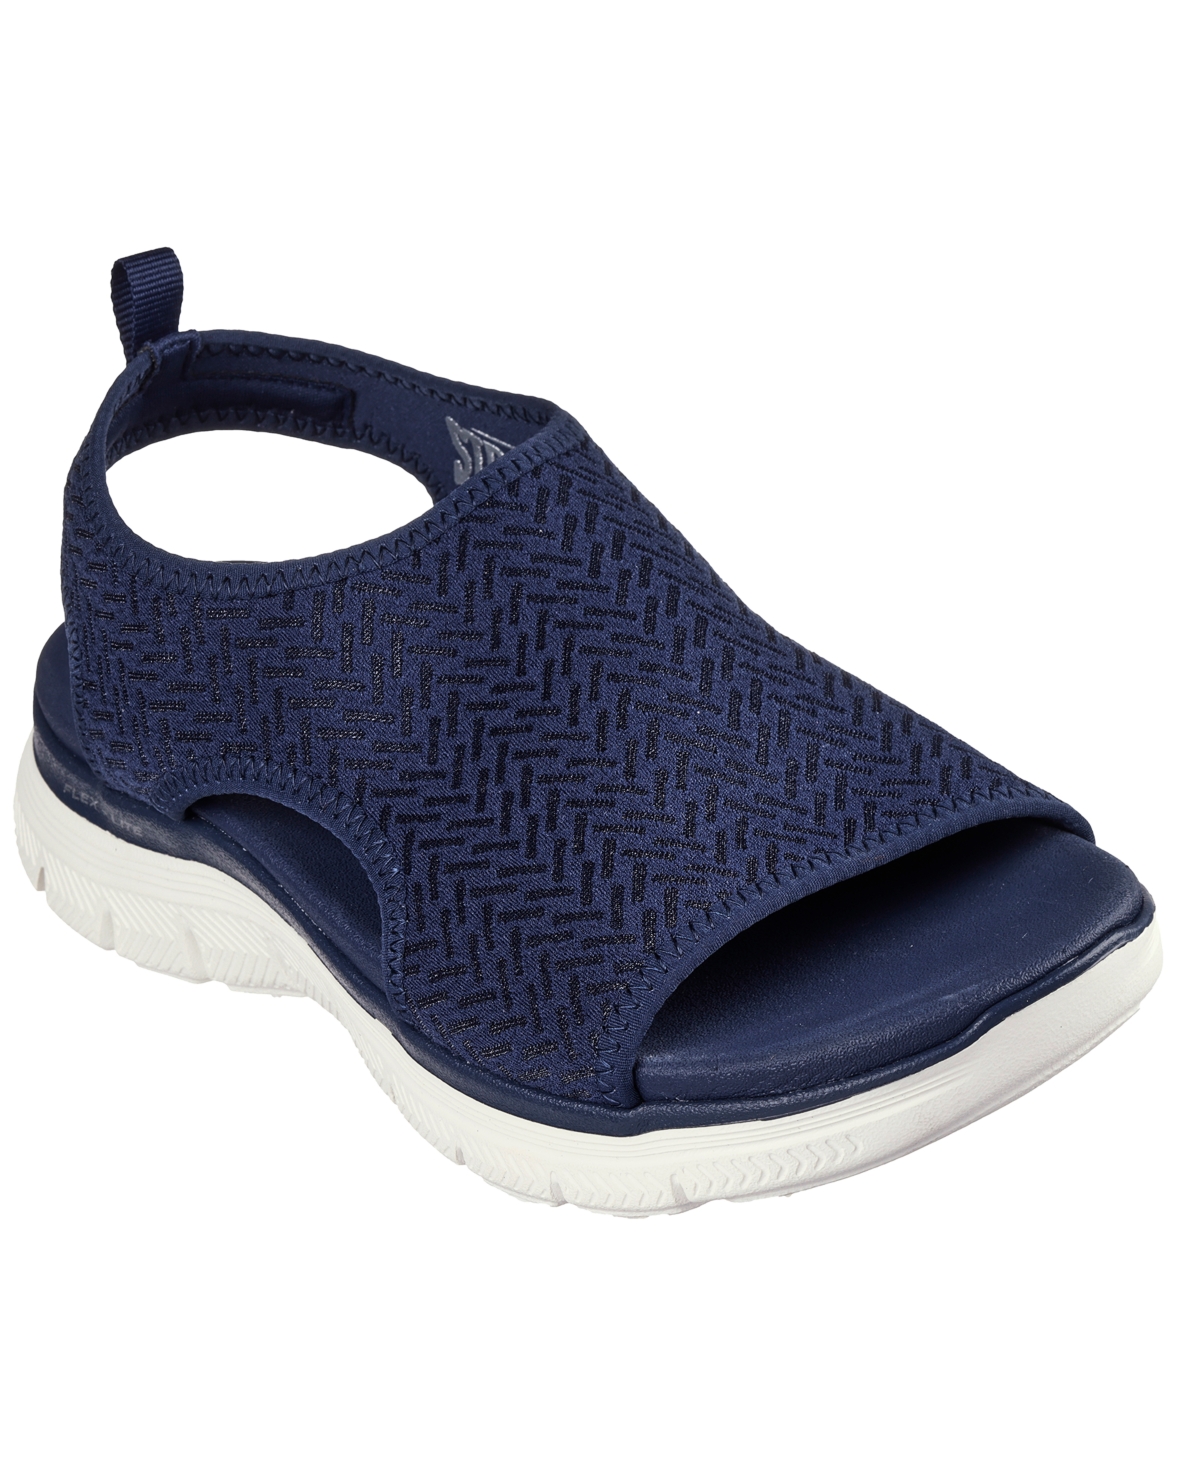 Women's Flex Appeal 4.0 - Livin in this Slip-On Walking Sandals from Finish Line - Navy